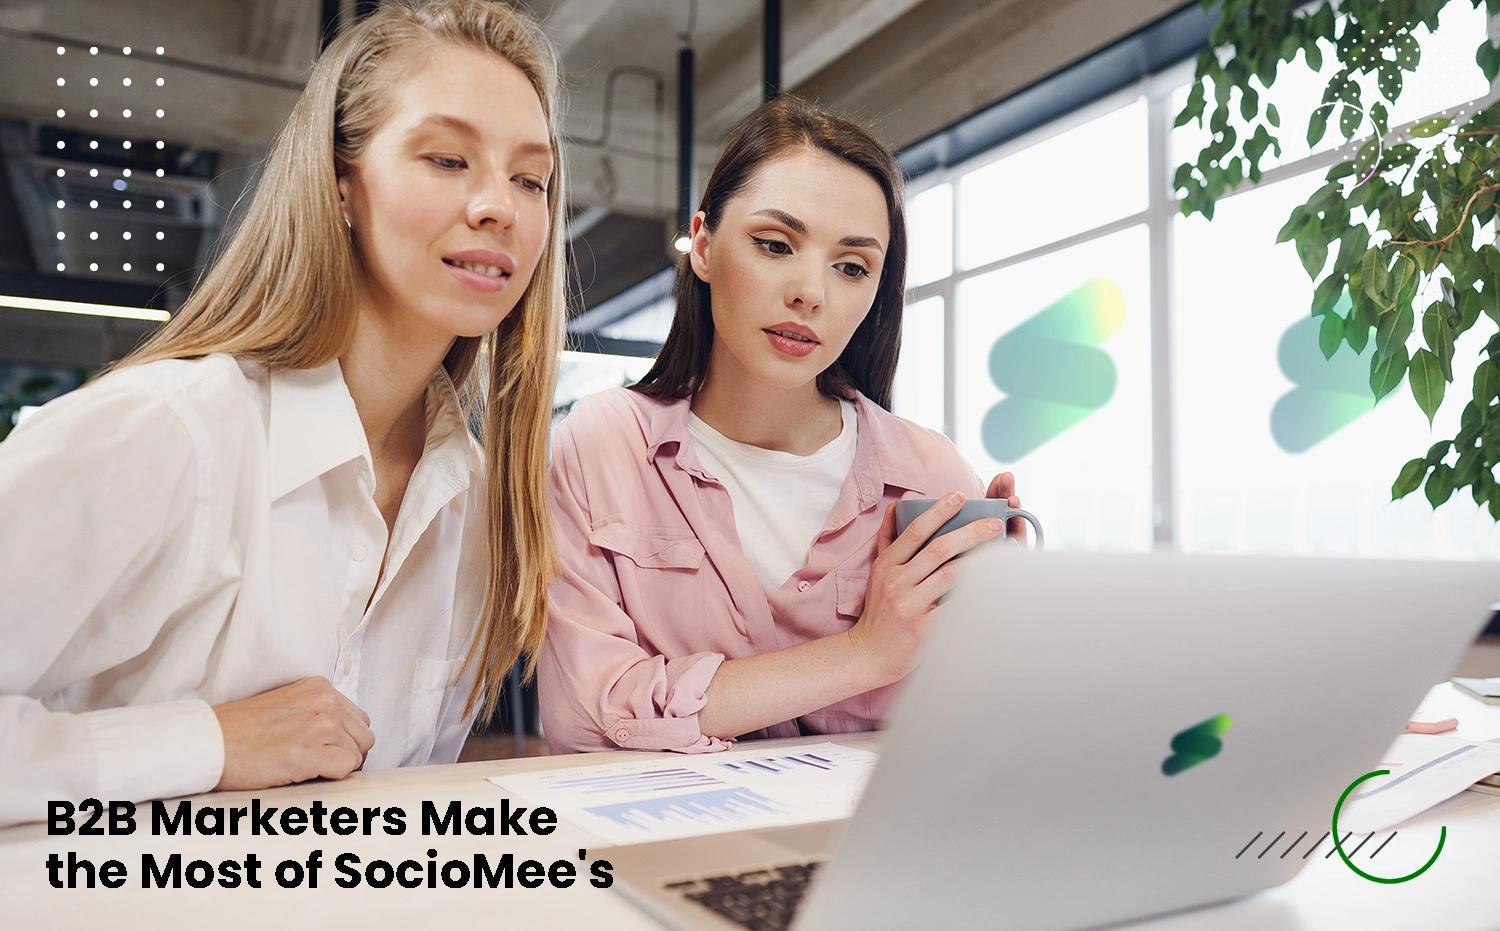 B2B Marketers Make the Most of SocioMee's